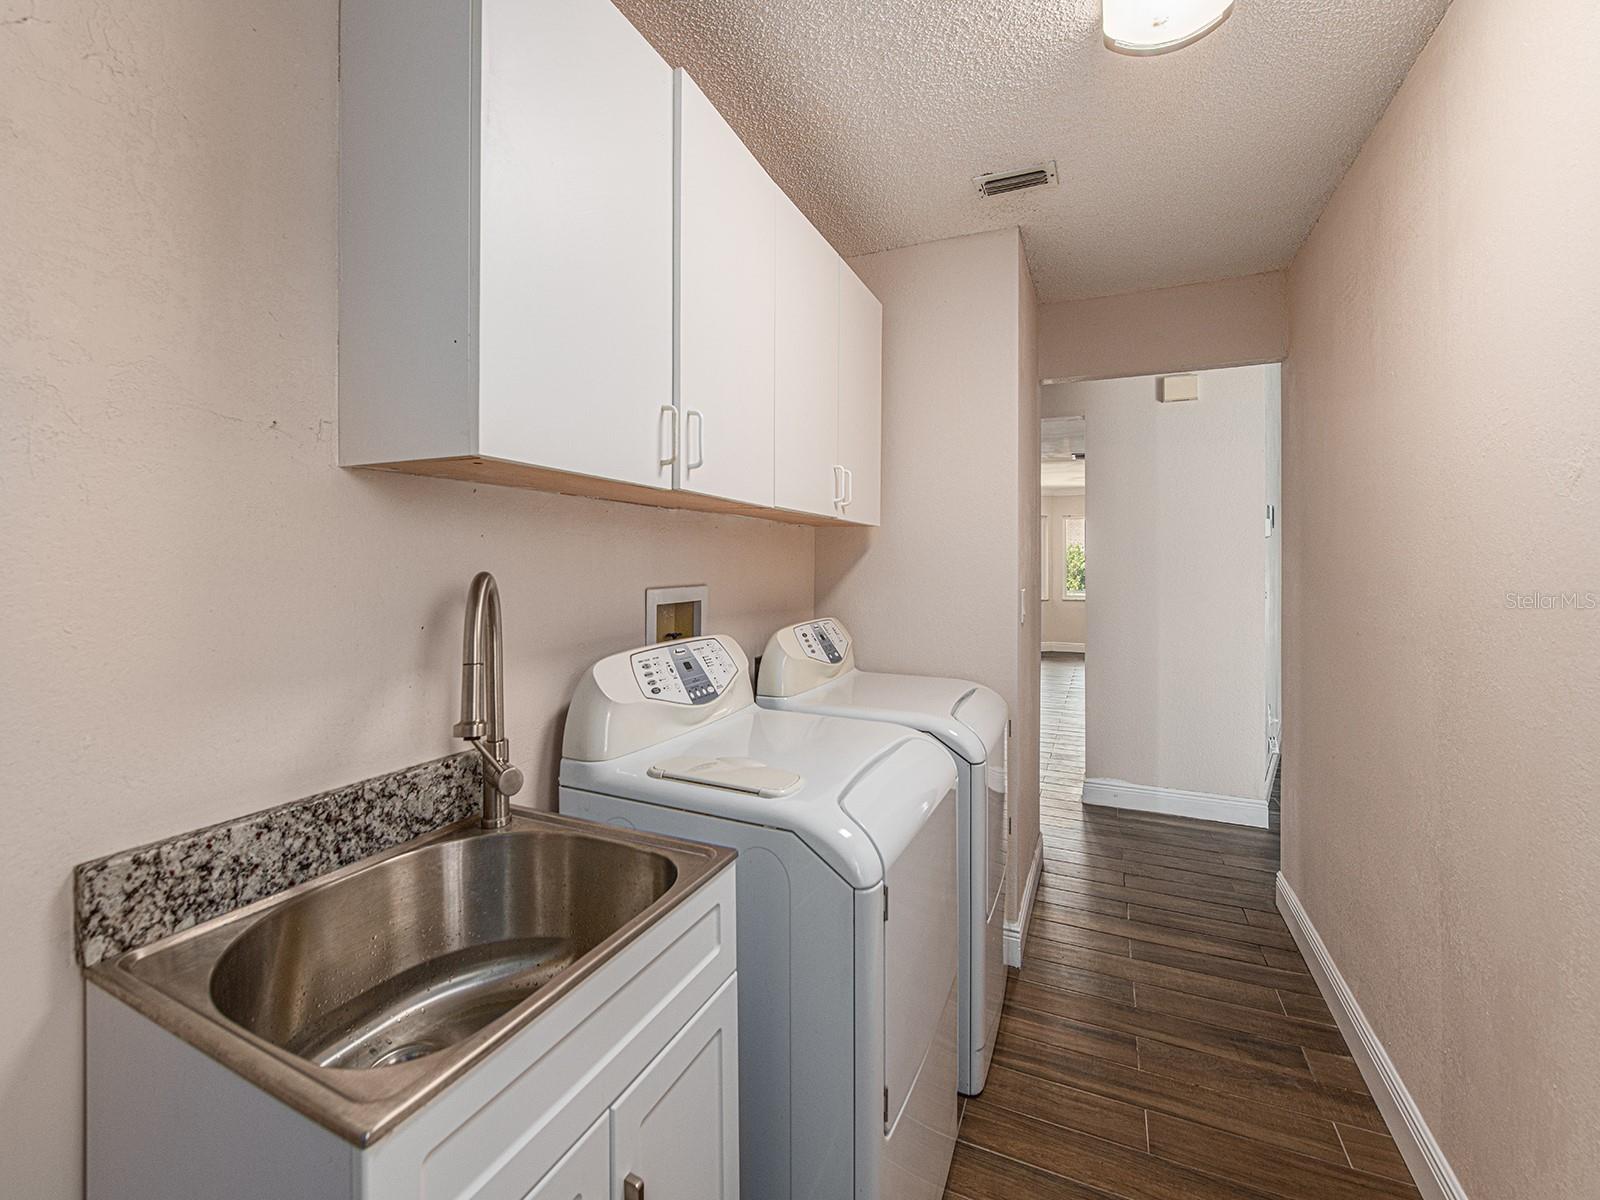 Laundry room with Utility tub